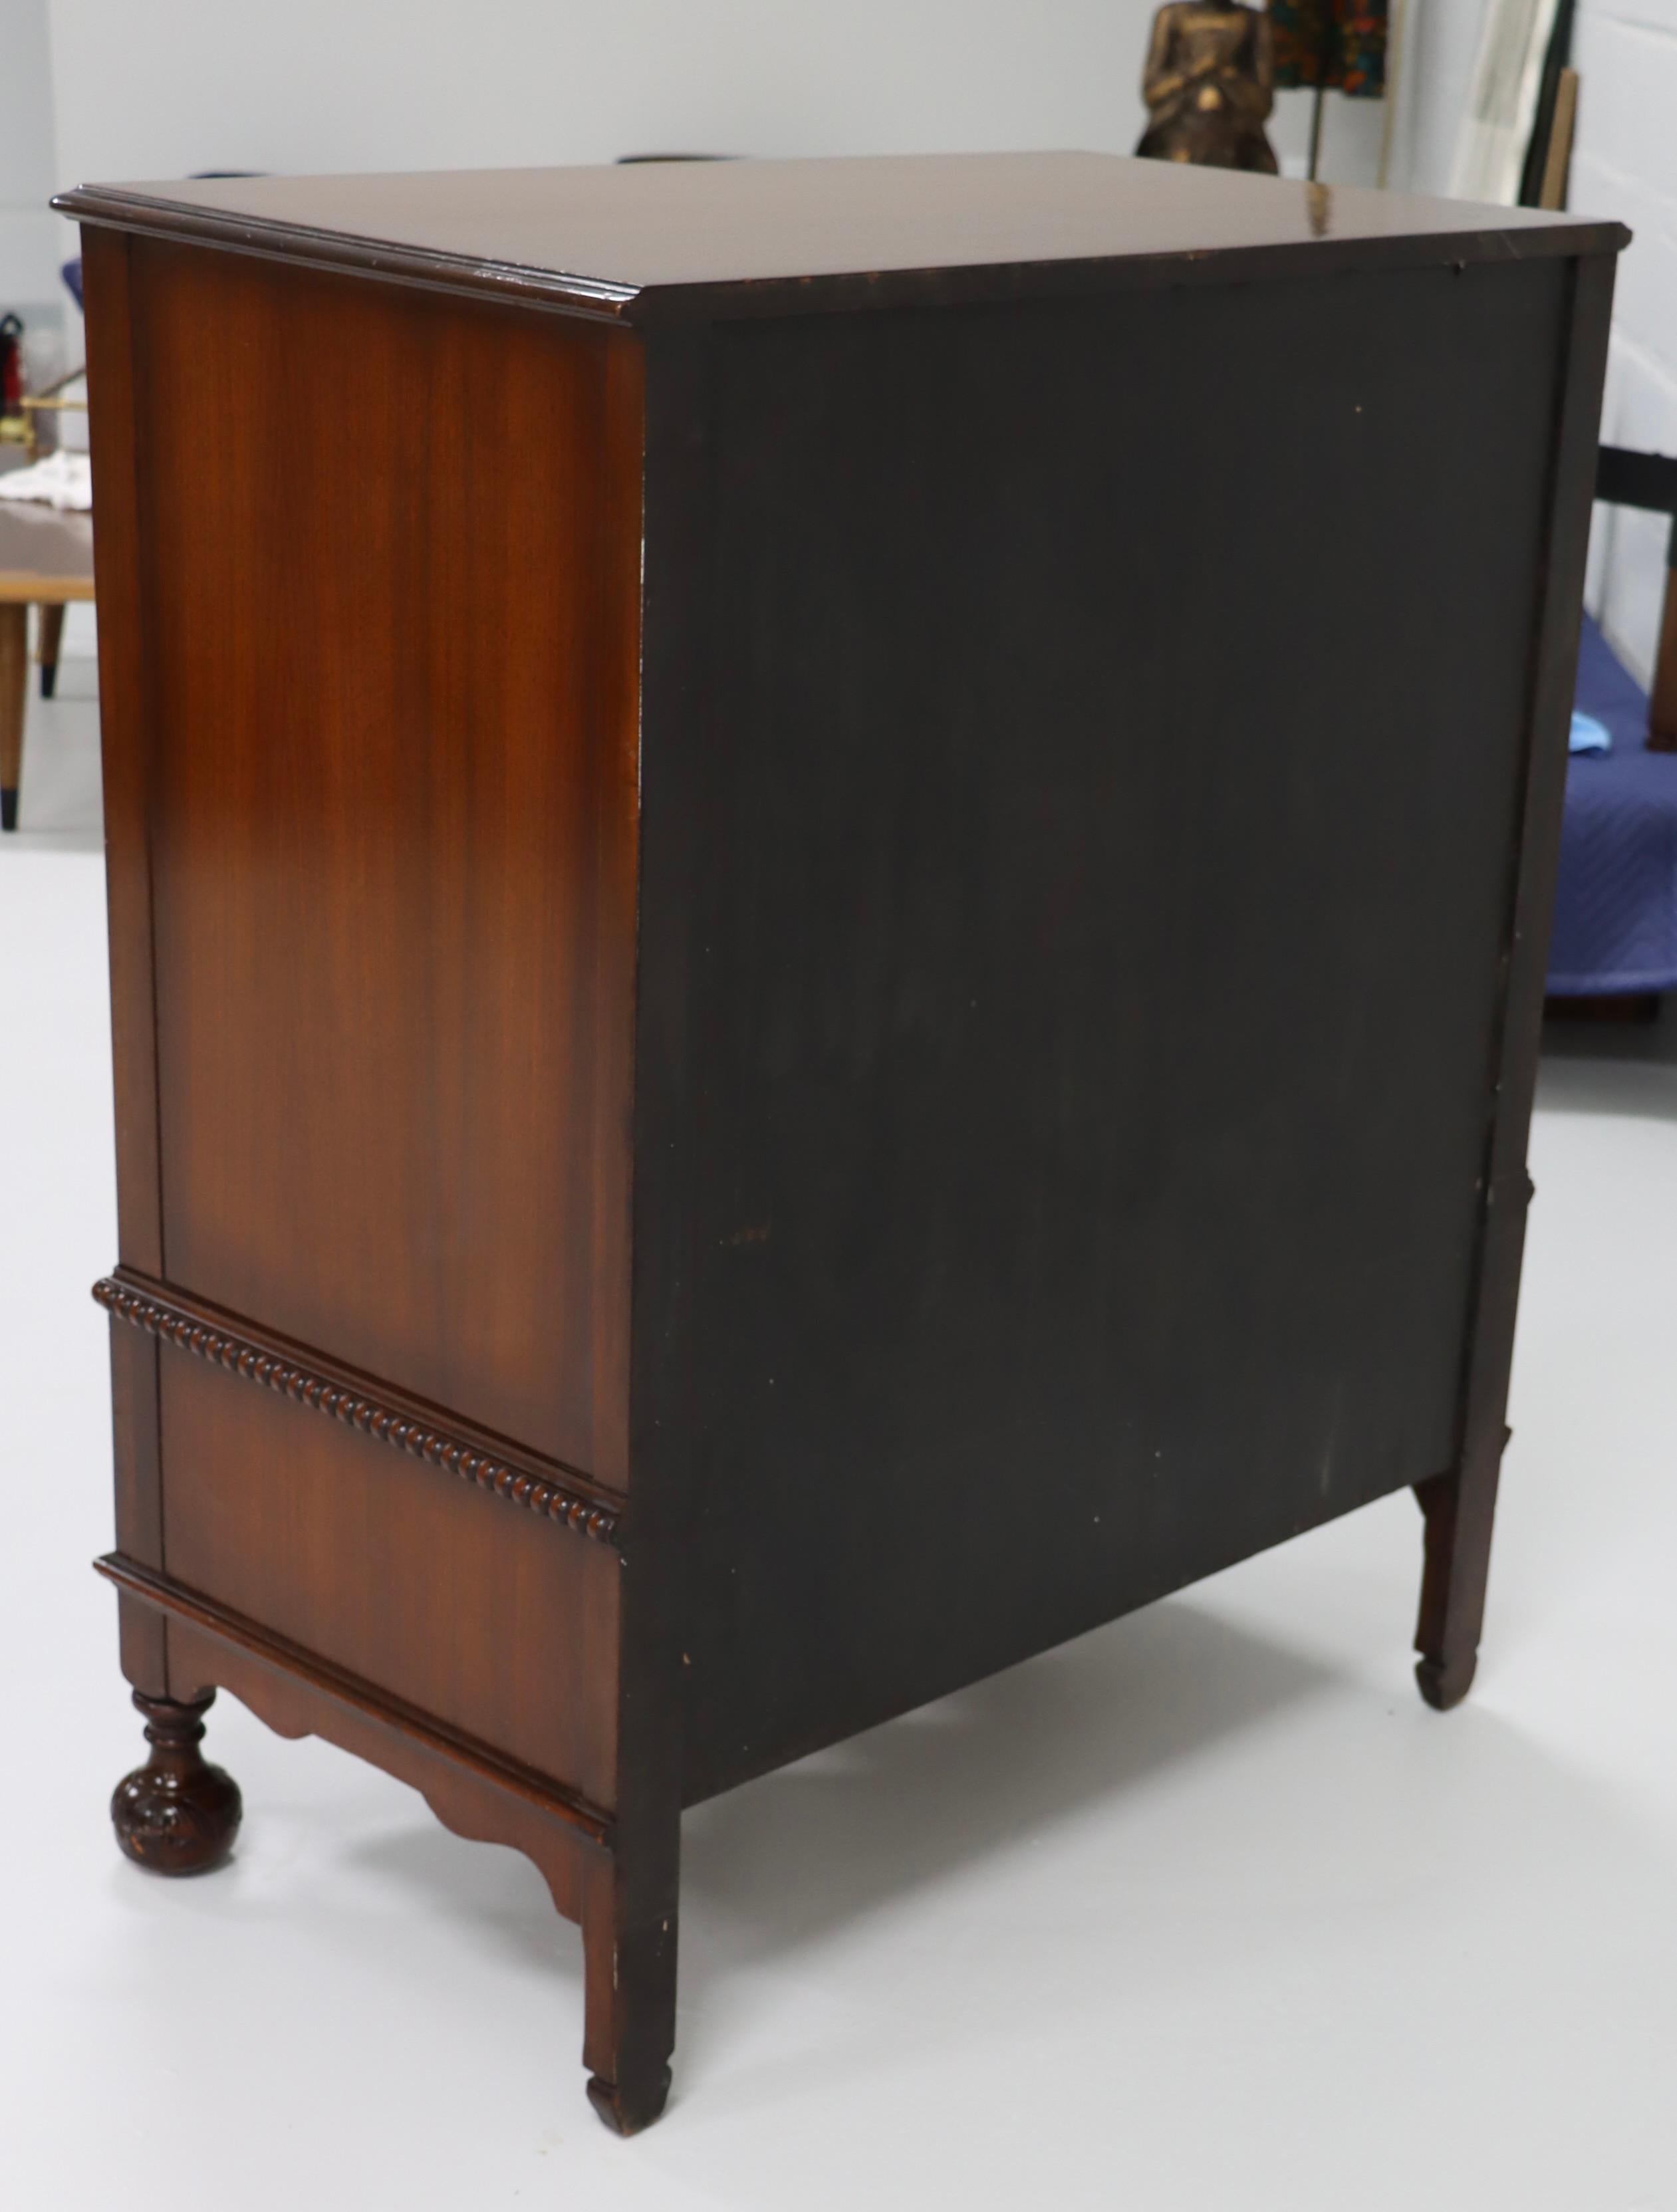 1940's Tall Dresser By Berkey & Gay Furniture With Amazing Carved Wood Detail 1